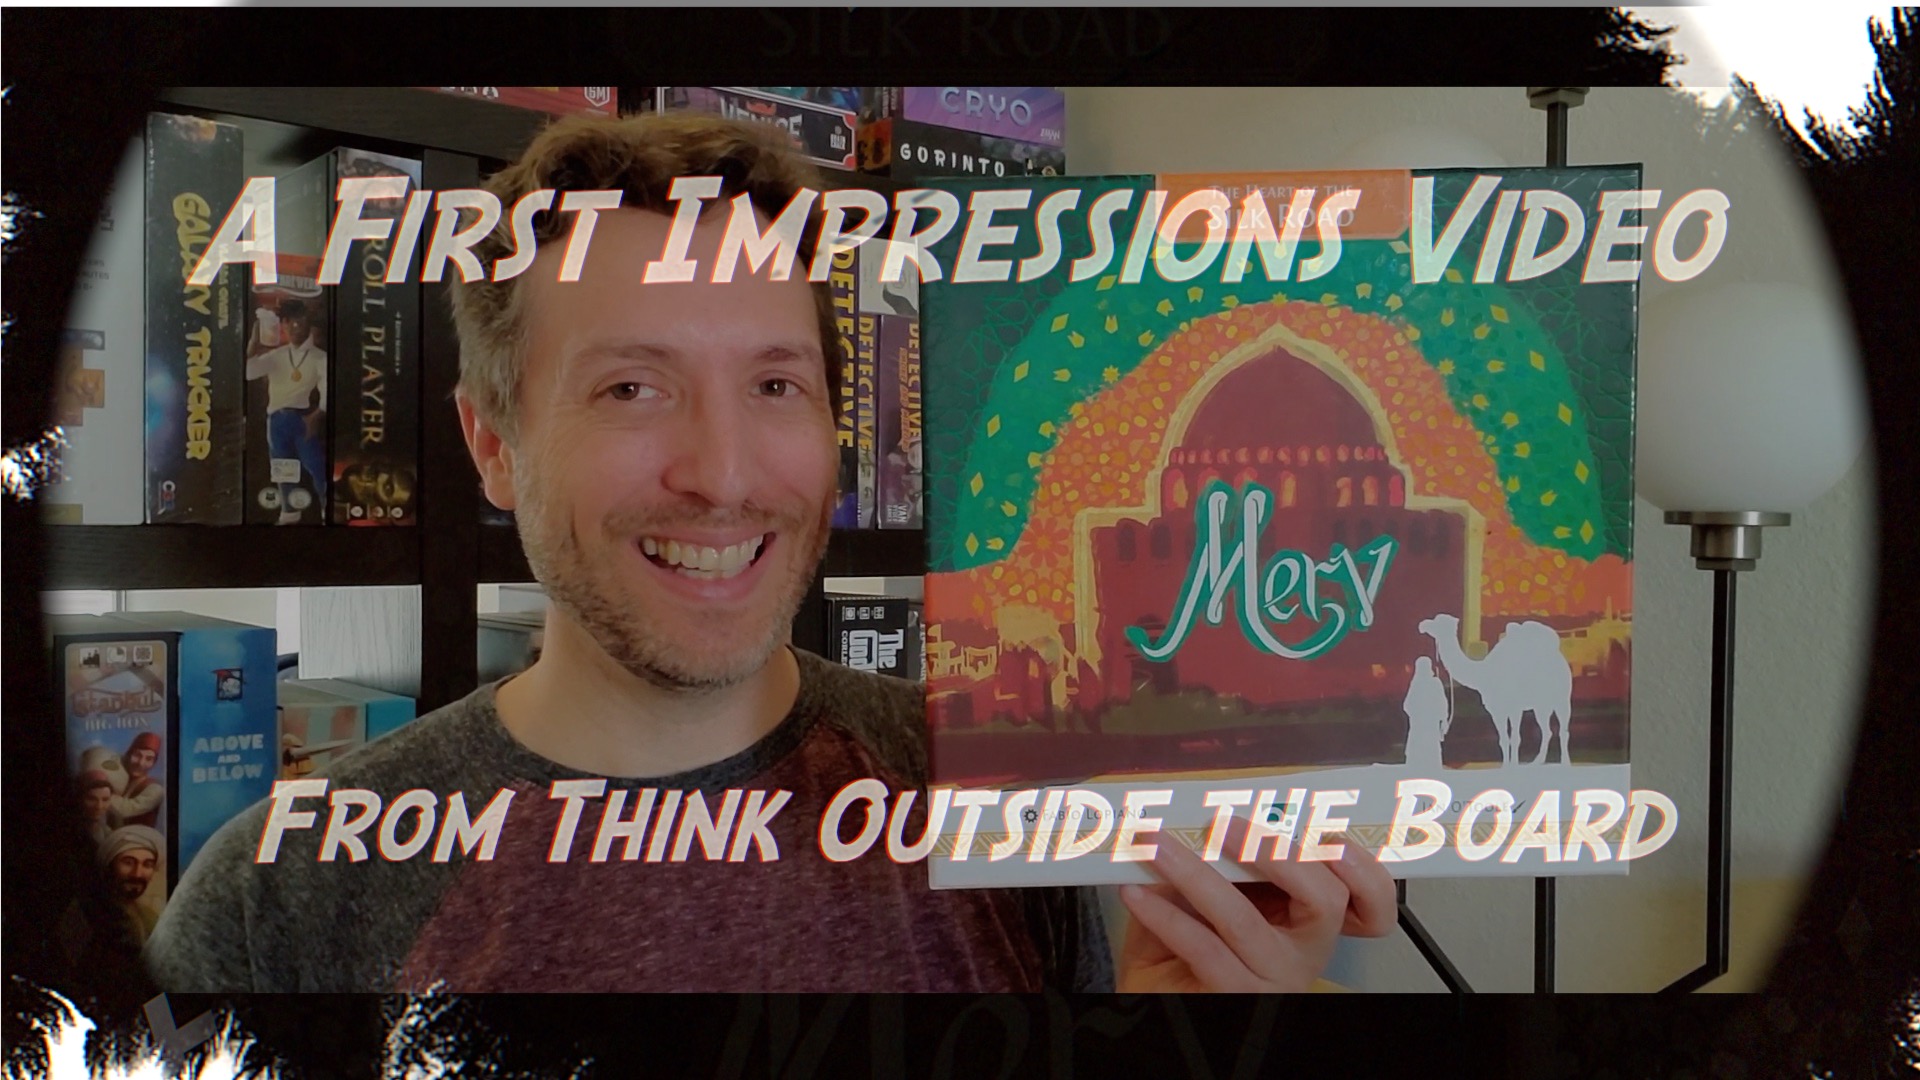 Merv: The Heart of the Silk Road First Impressions